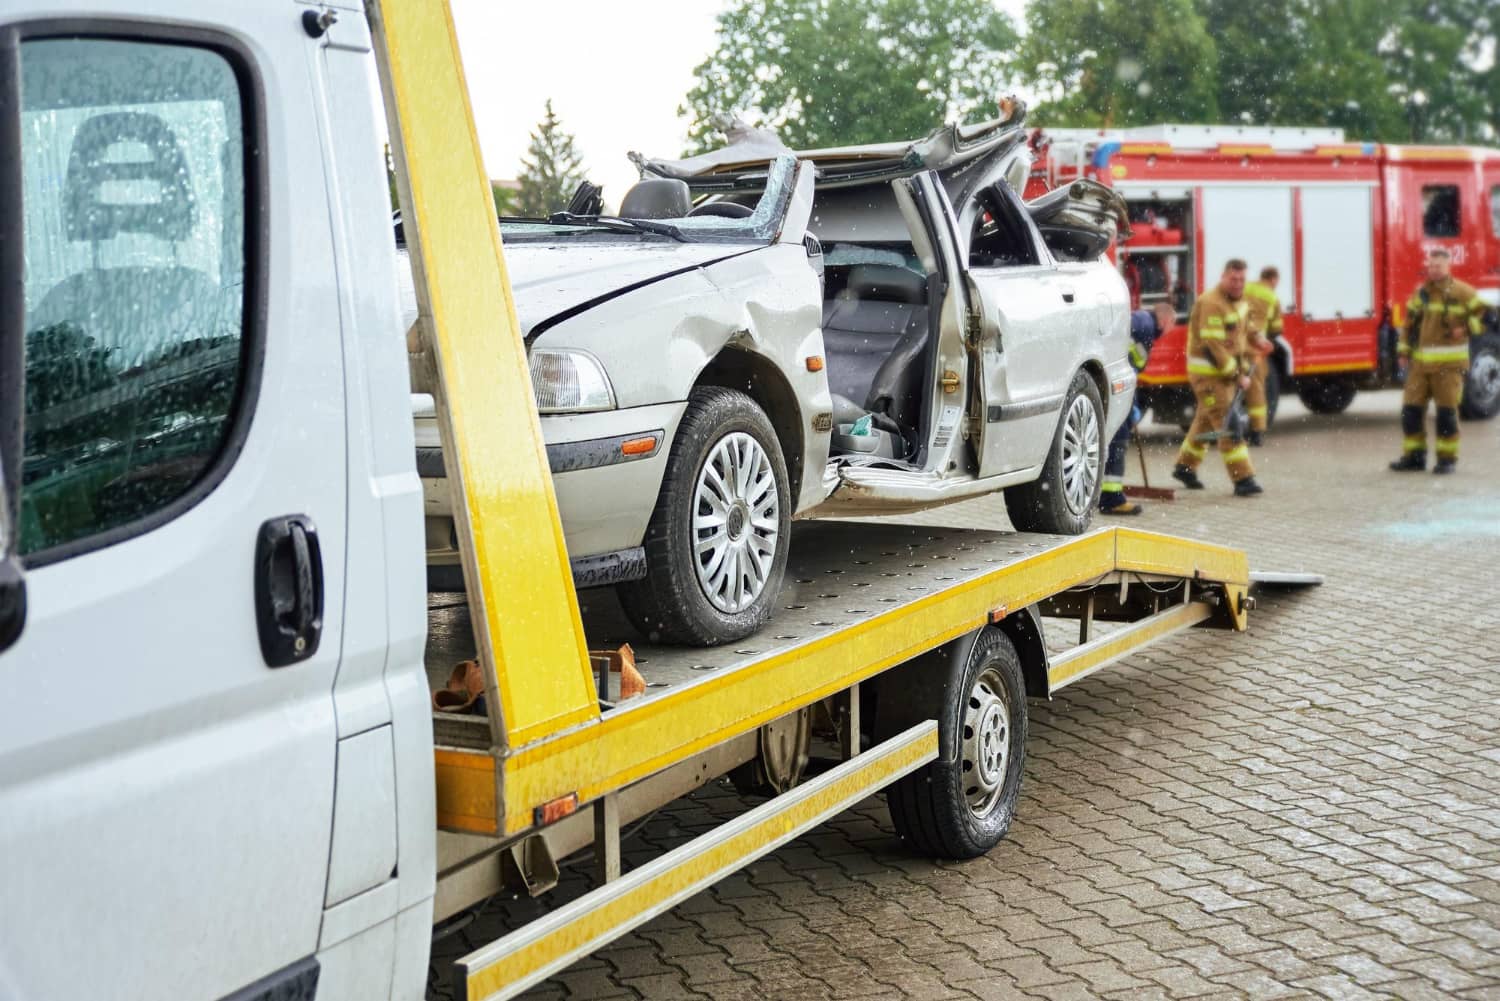 crashed-car-loading-into-tow-truck-after-traffic-accident-road (1)